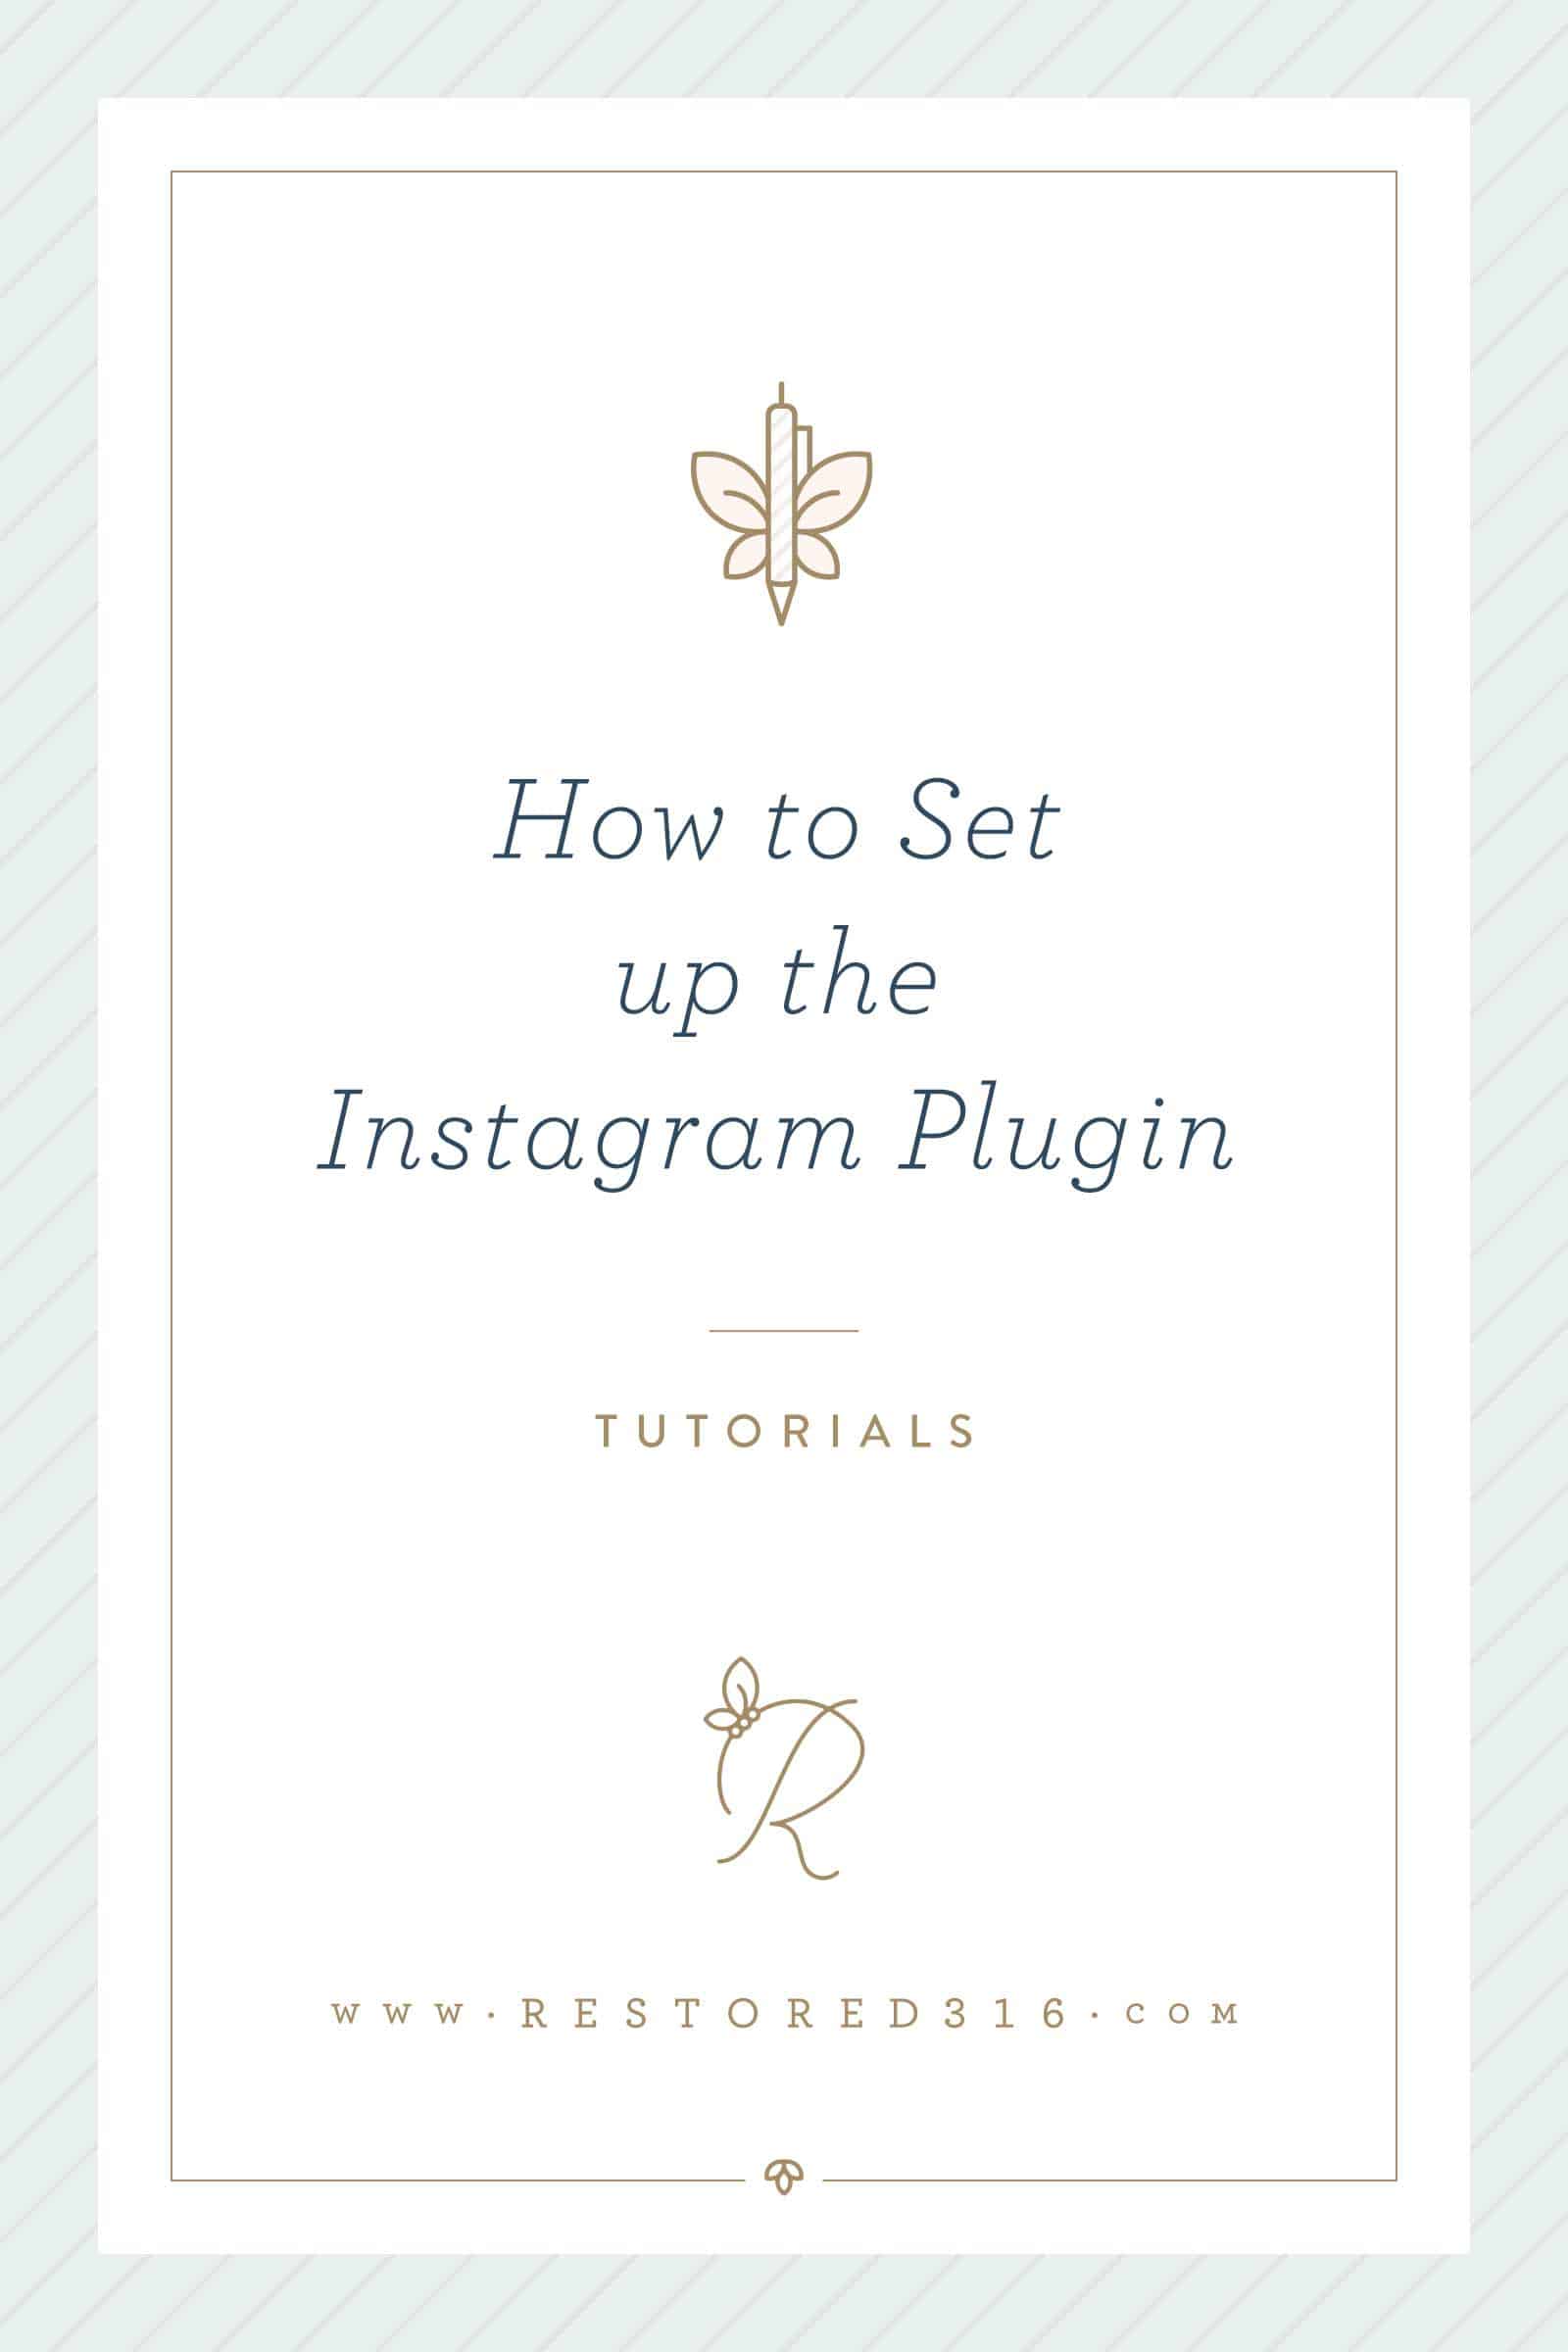 How to Set Up the Instagram Plugin